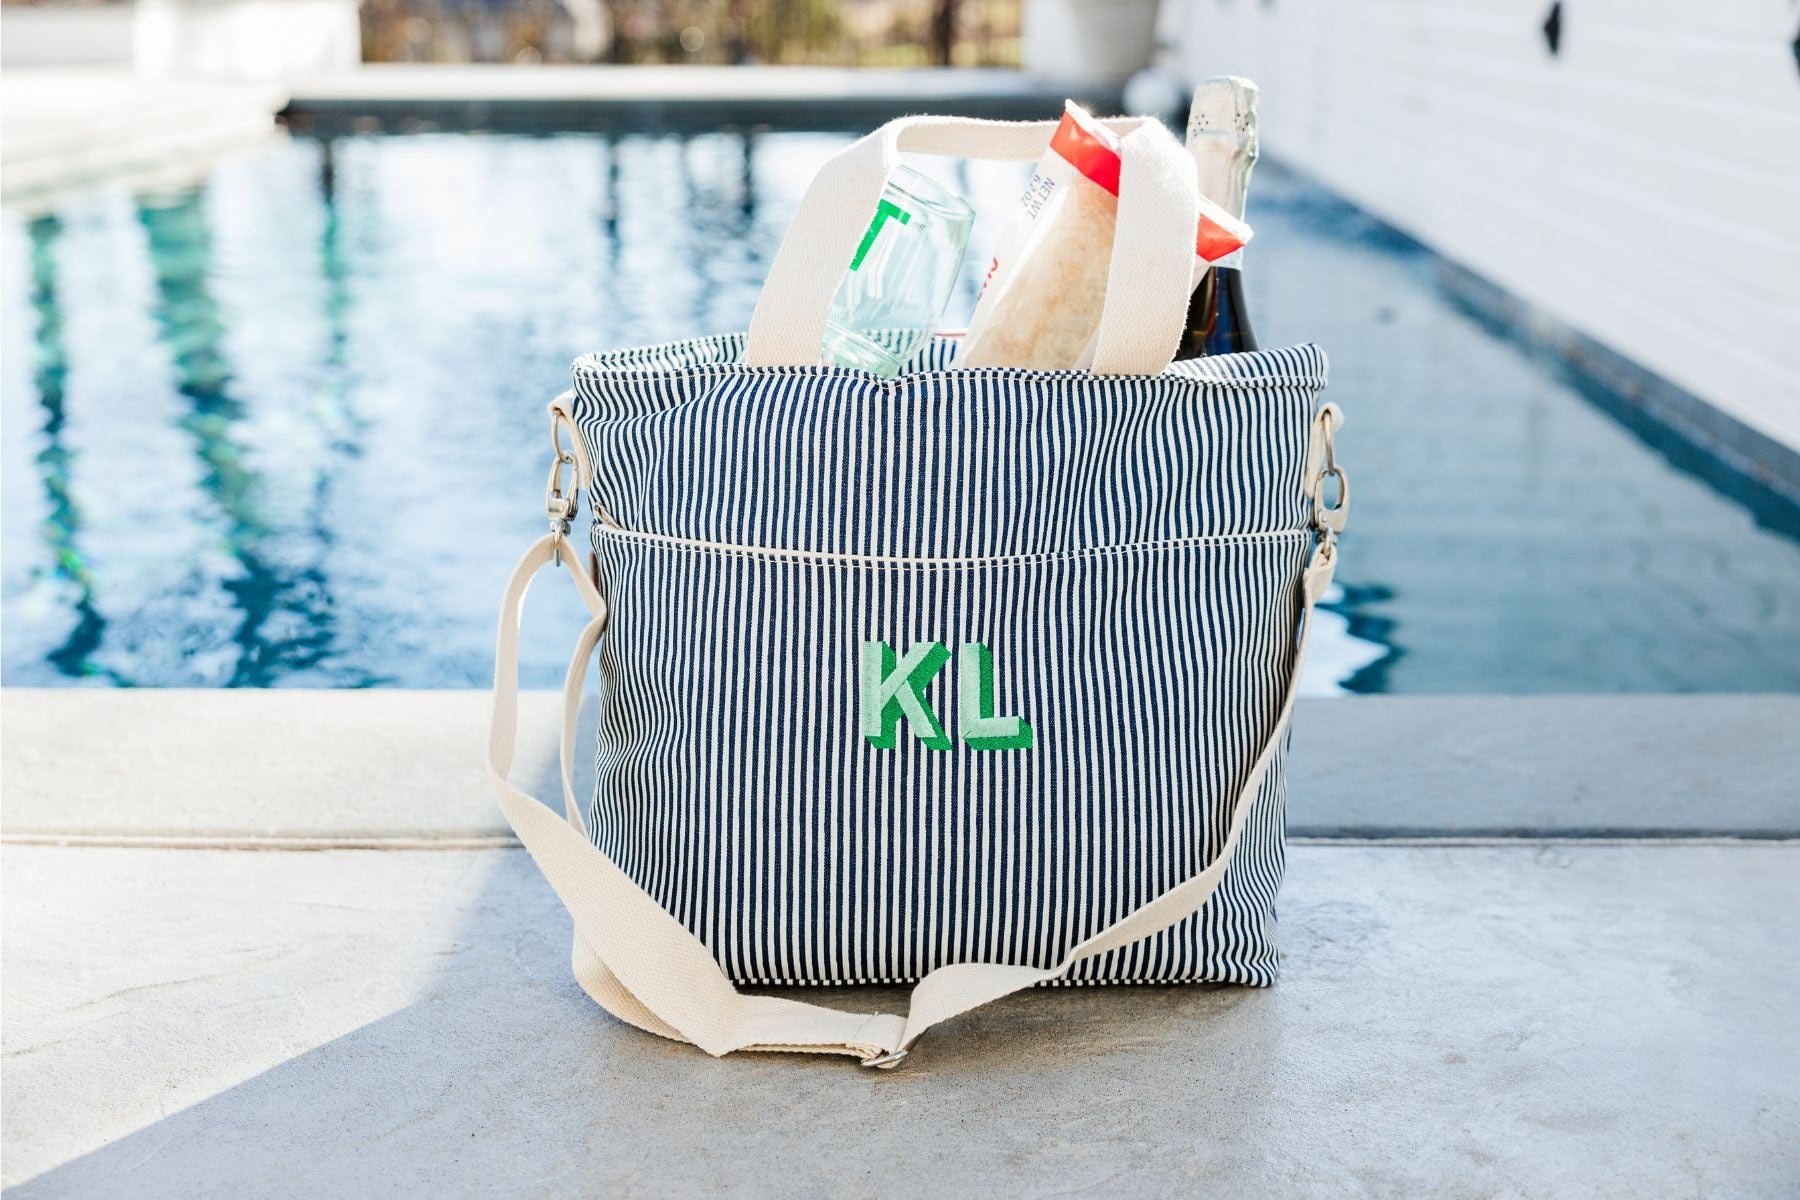 A monogrammed pink and navy stripped cooler tote are filled with snacks and drinks.